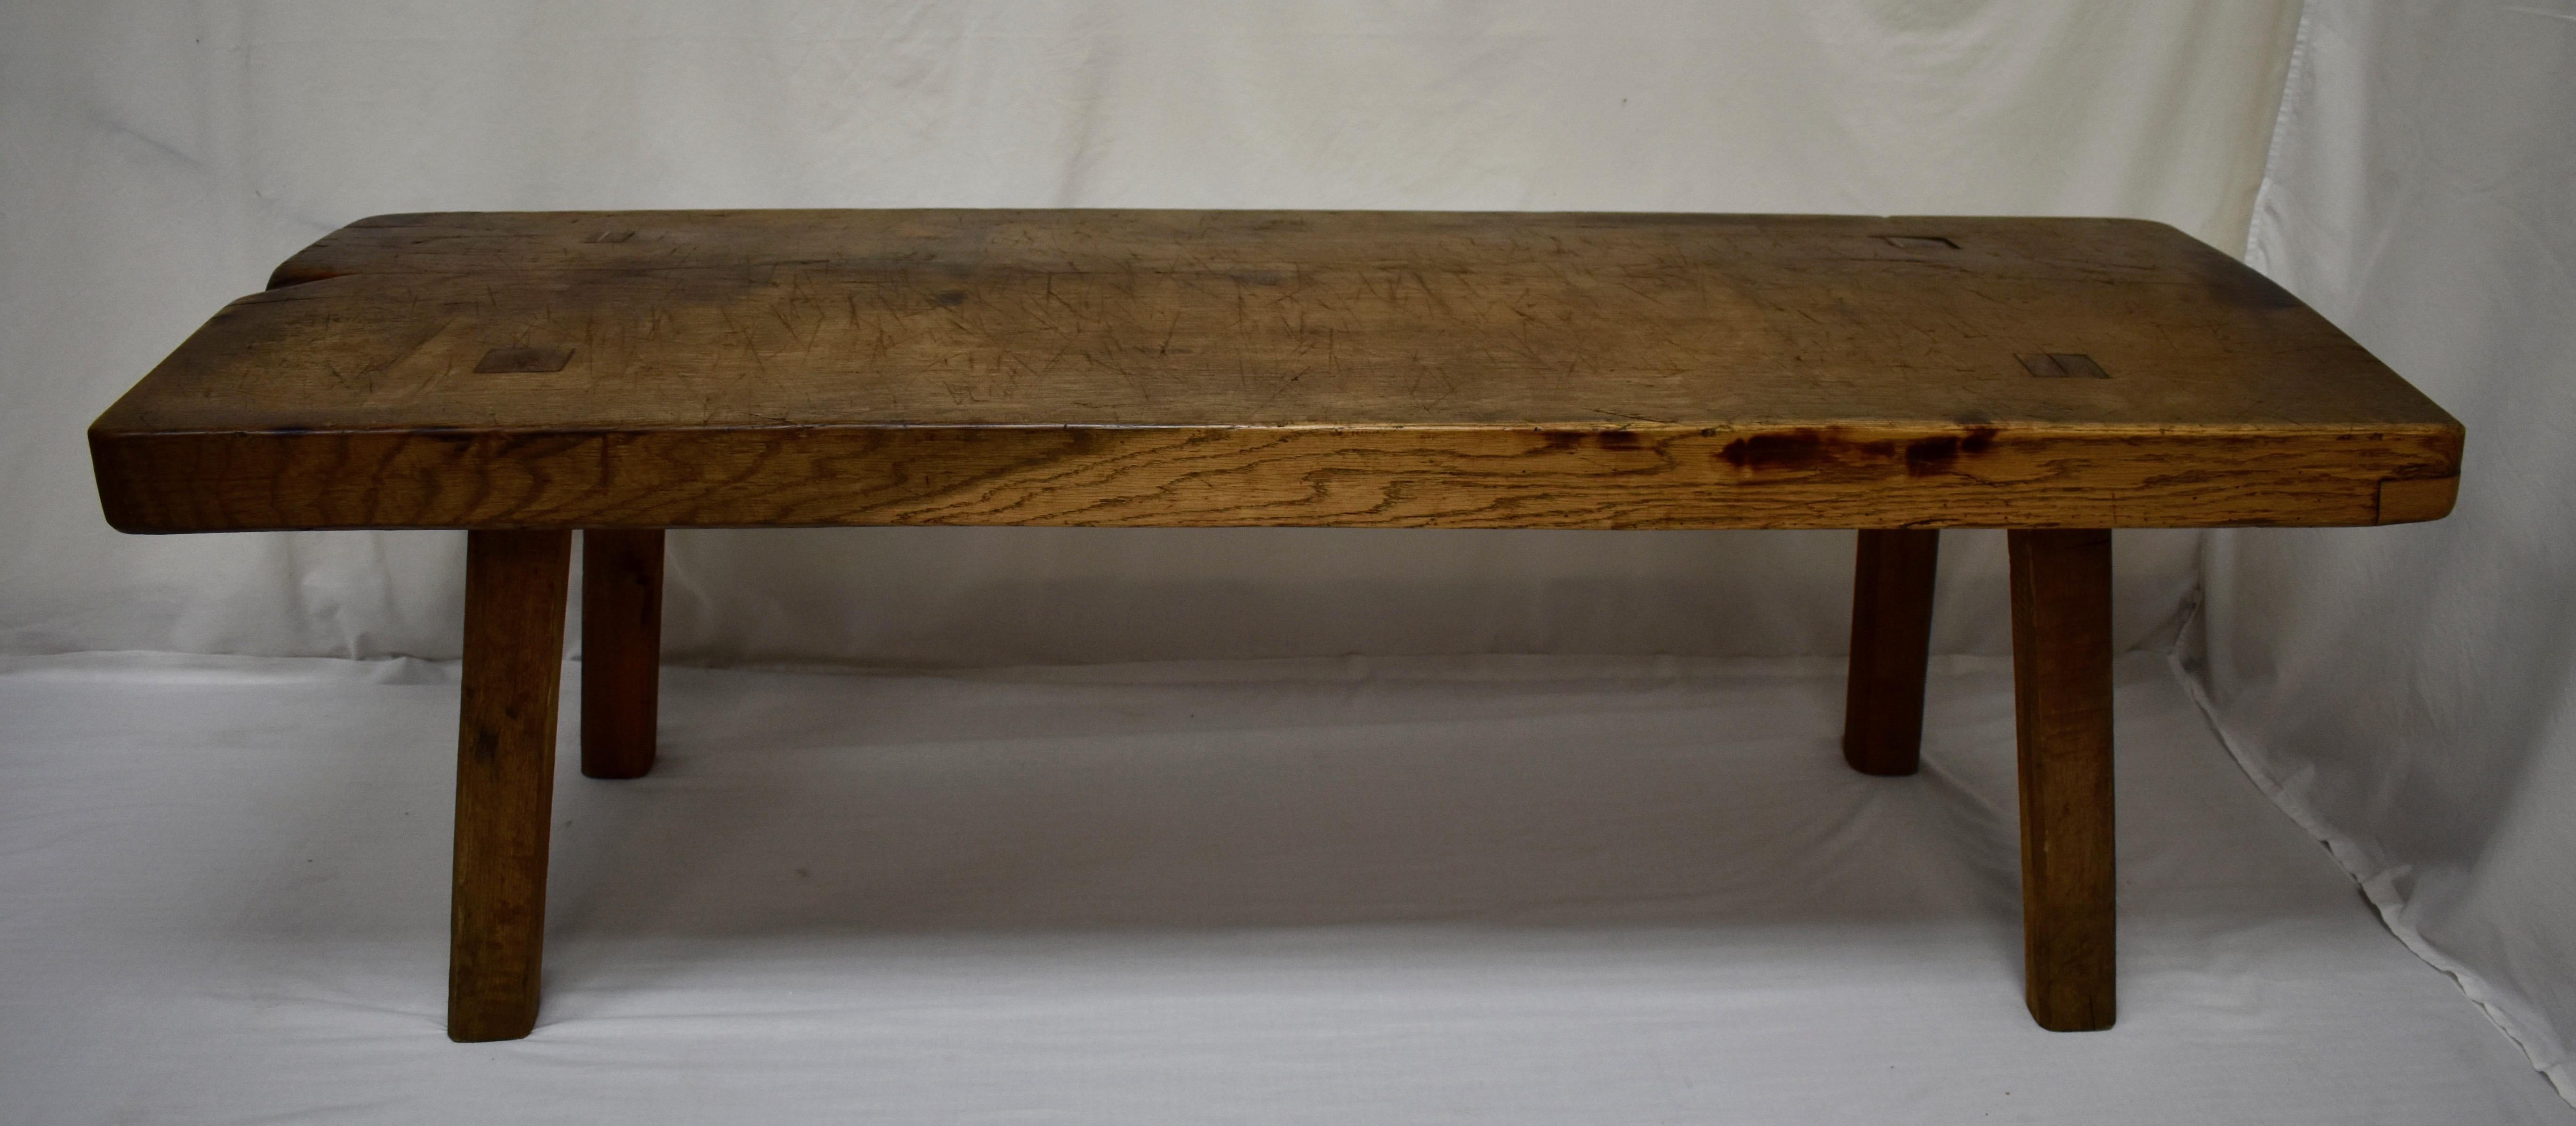 Large Oak Pig Bench Coffee Table 7